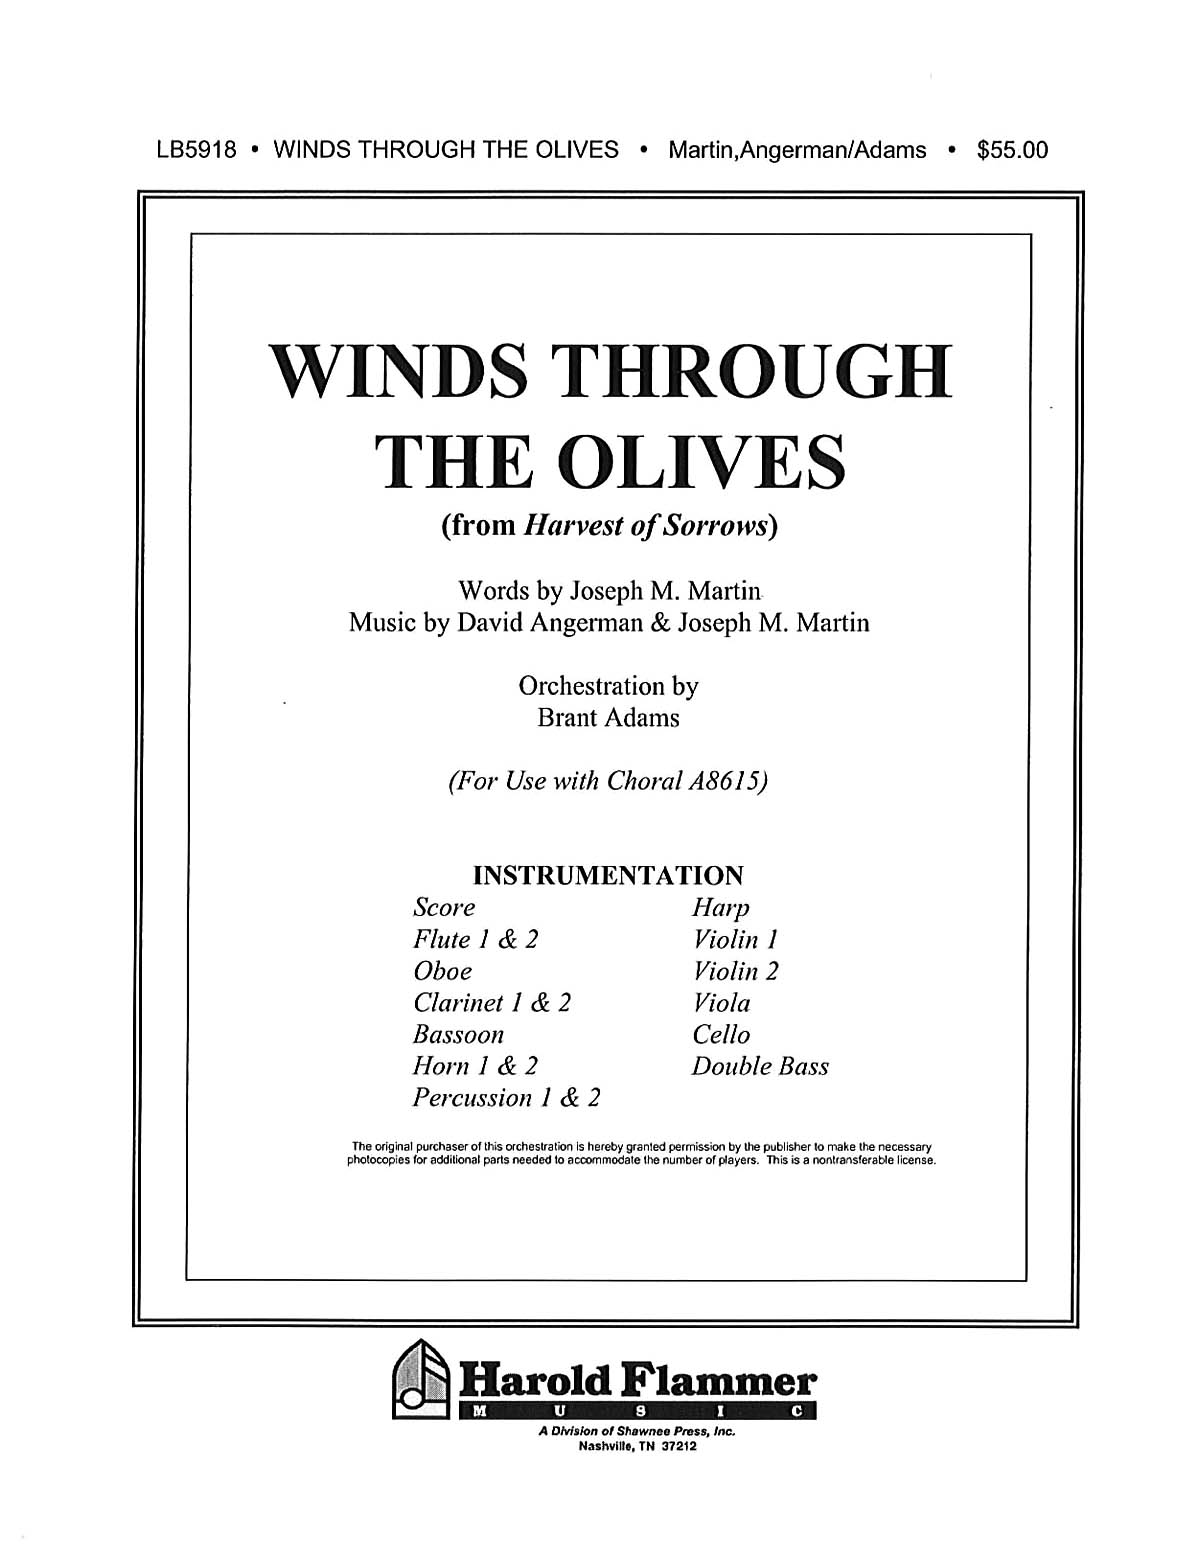 David Angerman Joseph M. Martin: Winds Through the Olives (from Harvest of